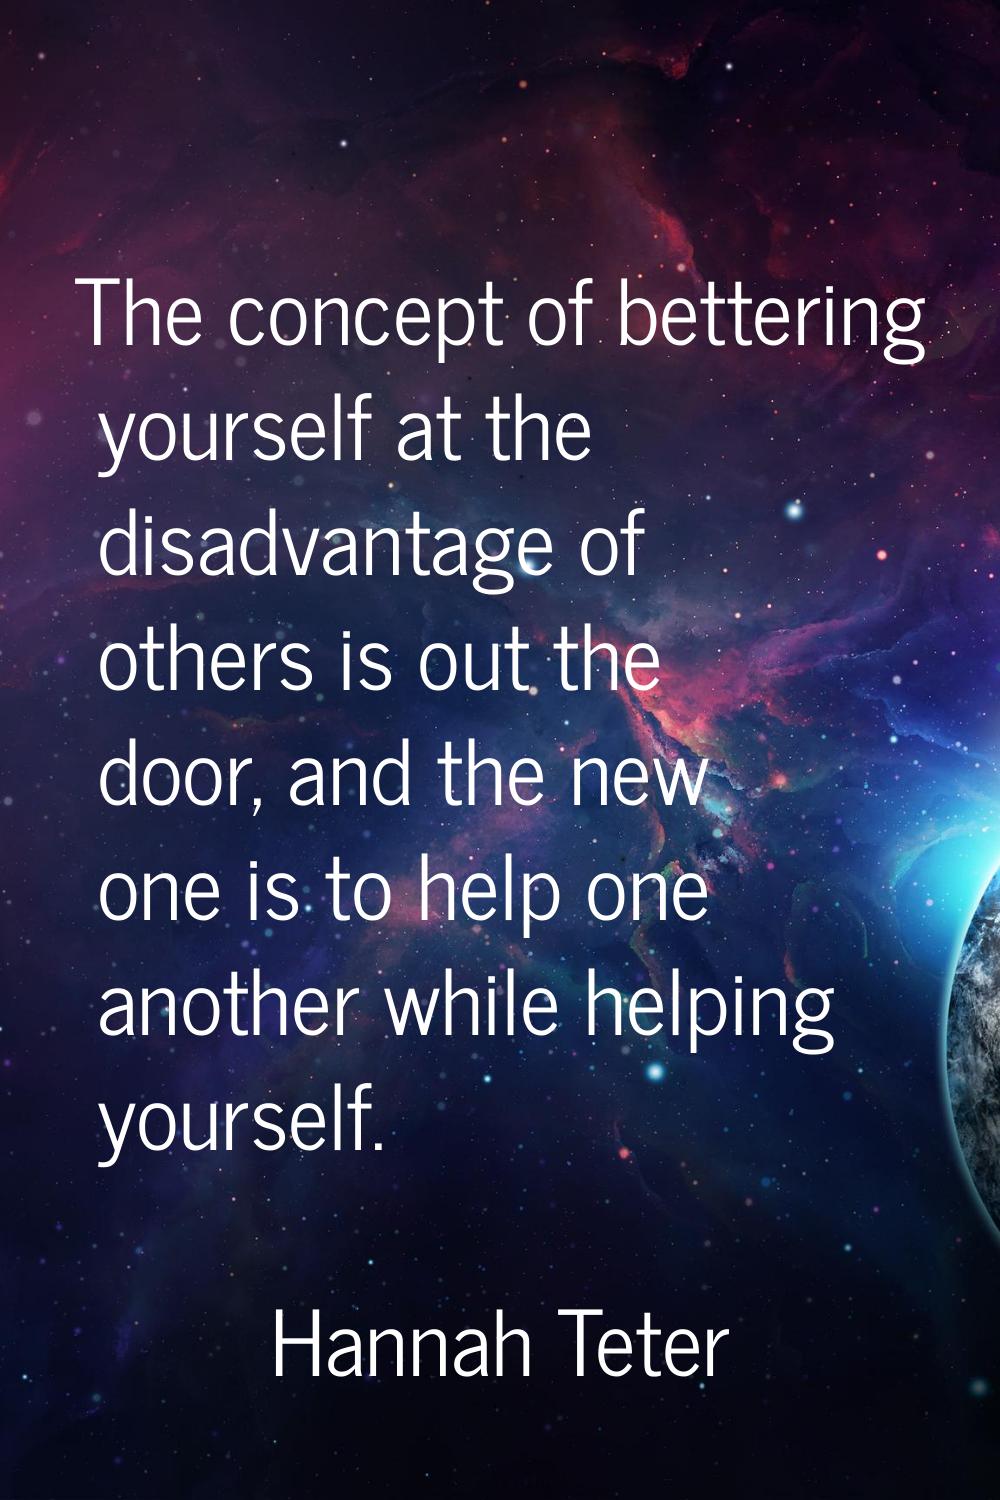 The concept of bettering yourself at the disadvantage of others is out the door, and the new one is